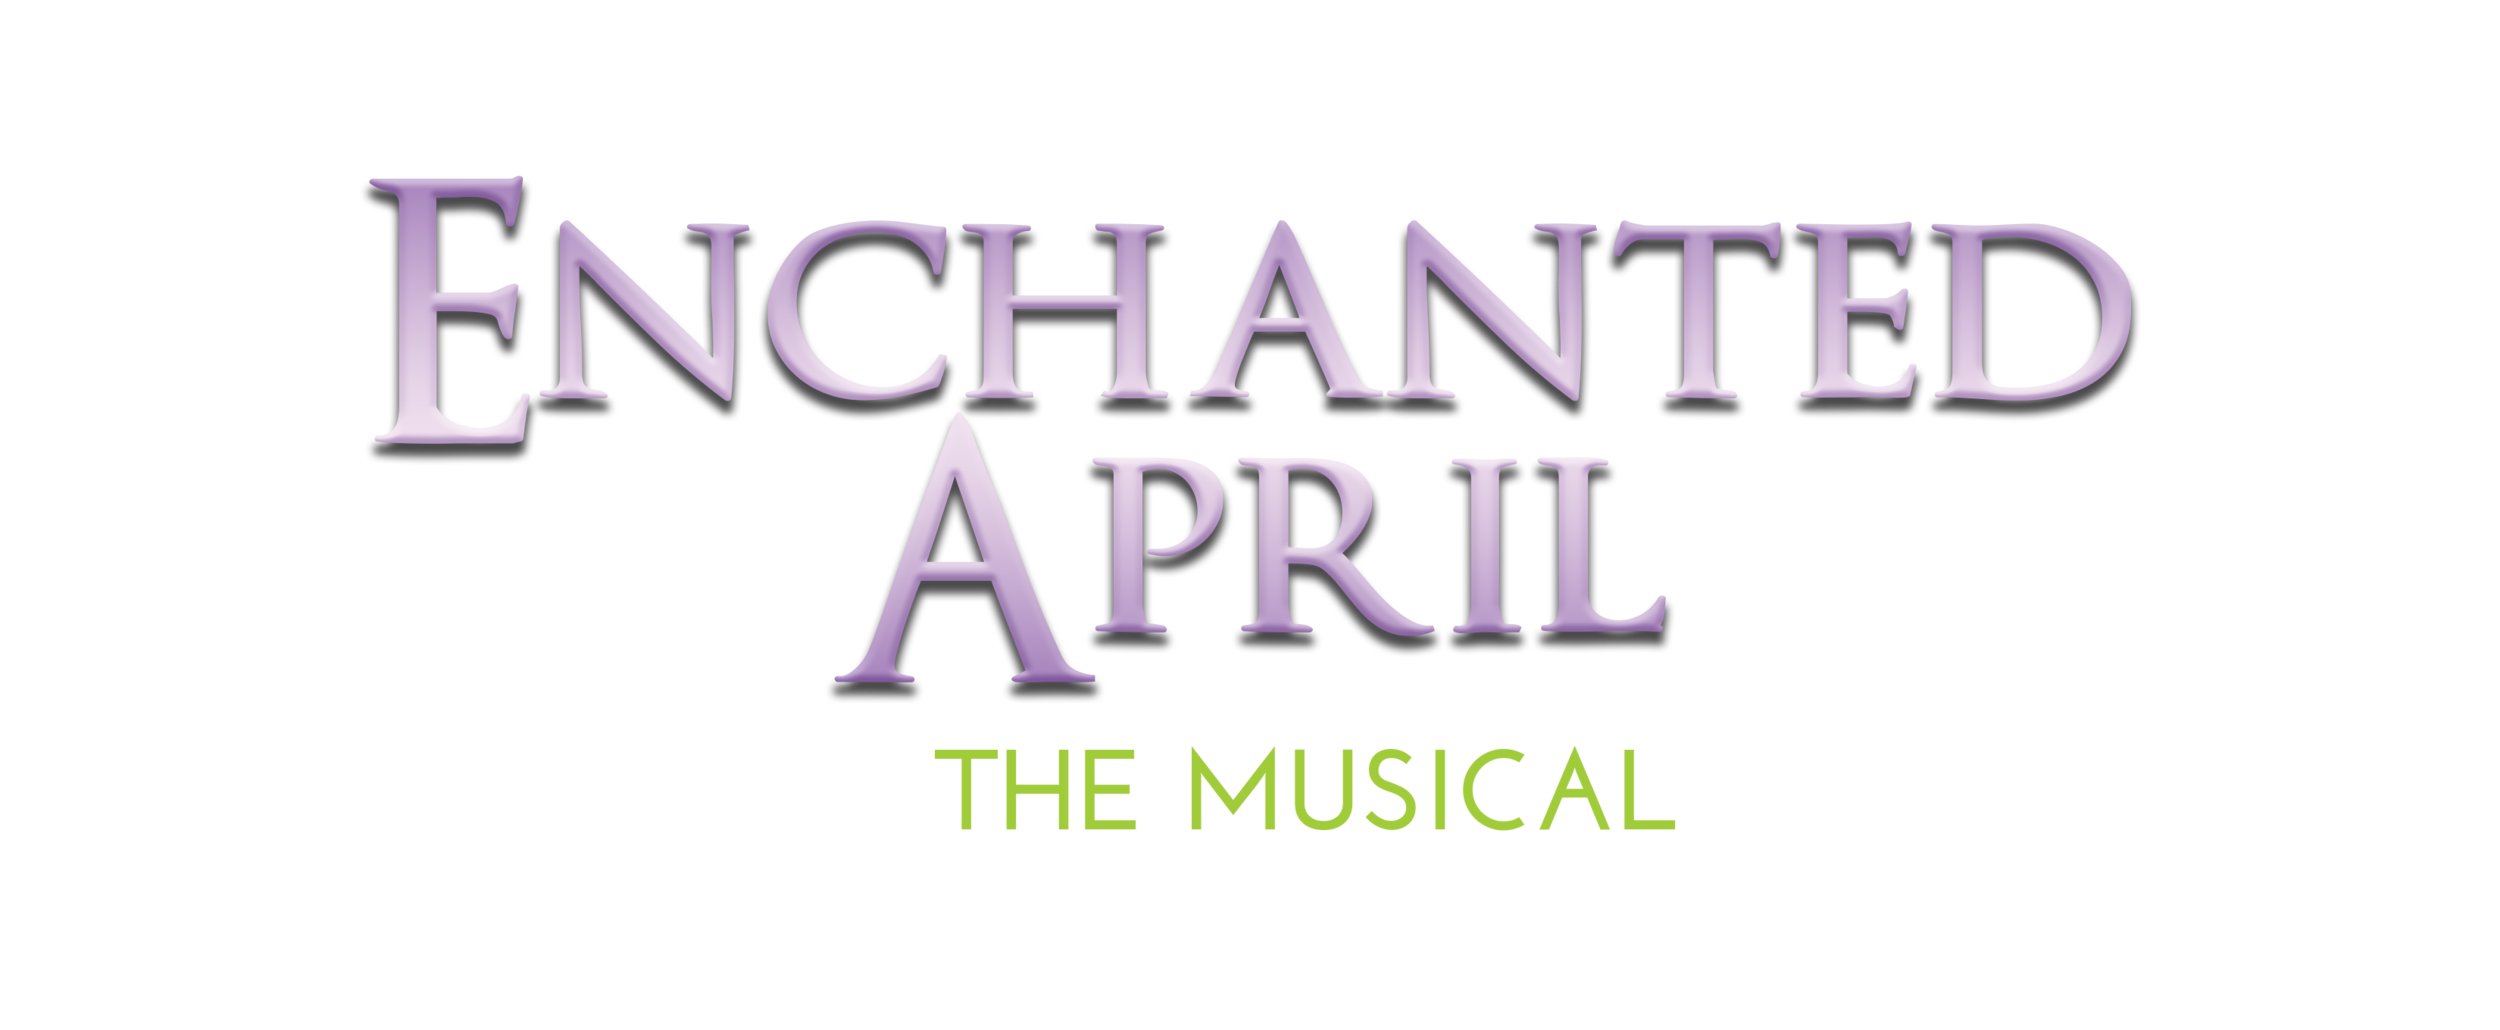 Enchanted April The Musical